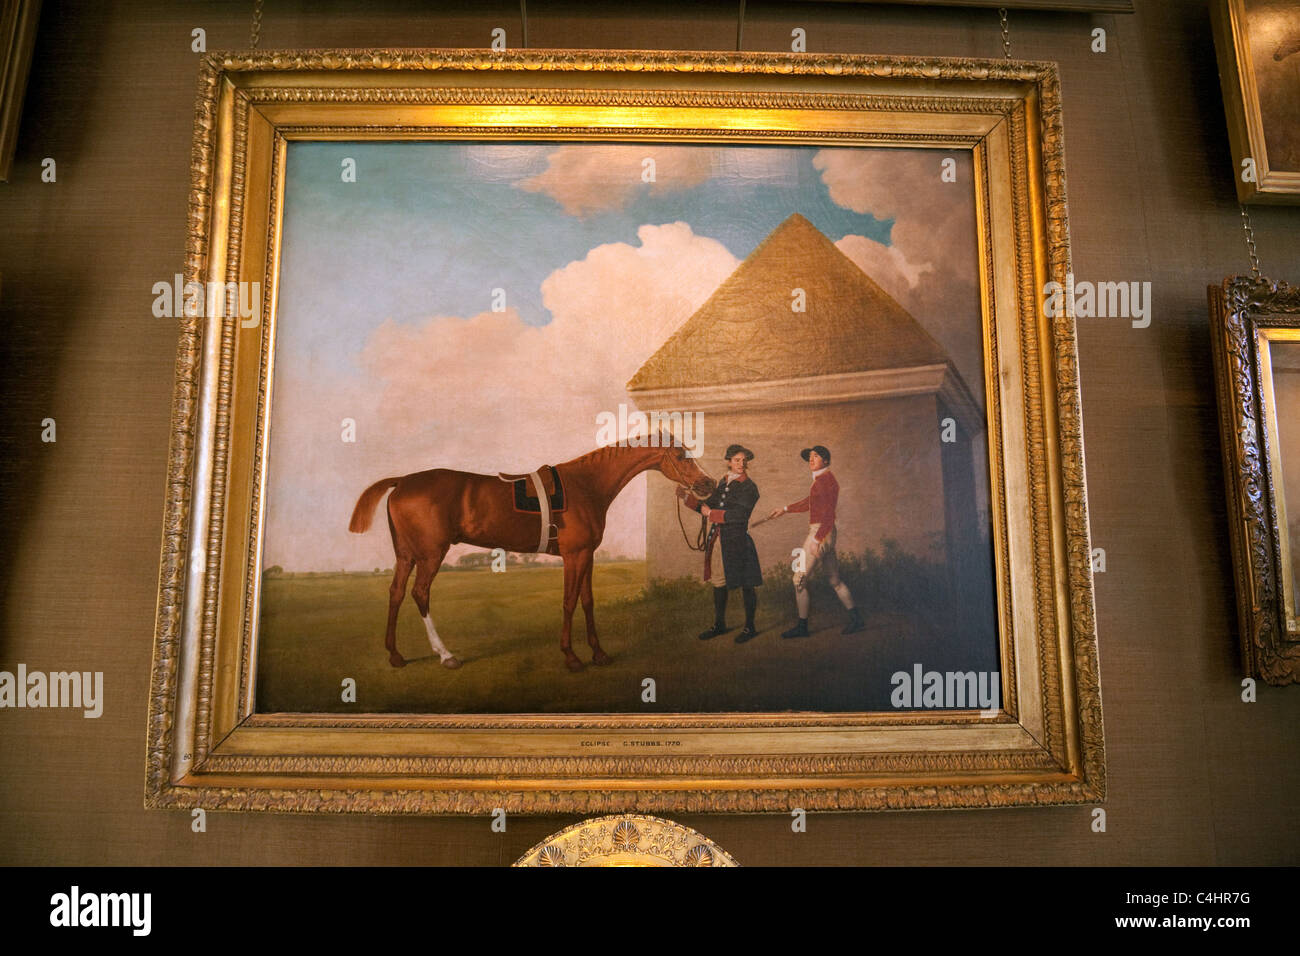 The original oil painting of the famous racehorse Eclipse by George Stubbs hanging in the Jockey Club, Newmarket Suffolk UK Stock Photo